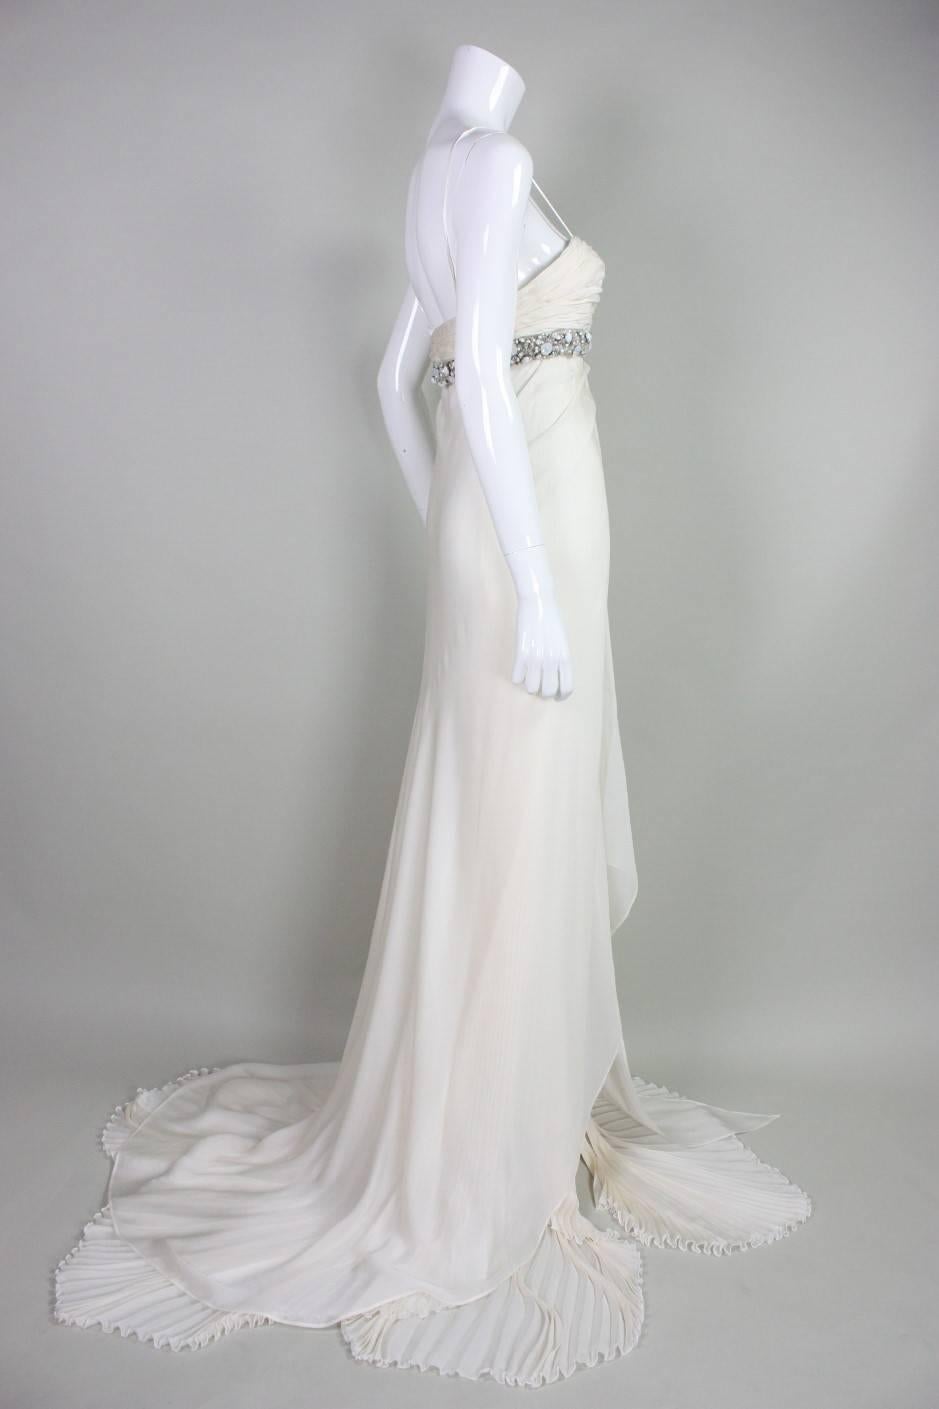 Roberto Cavalli Chiffon Goddess Gown In Excellent Condition For Sale In Los Angeles, CA